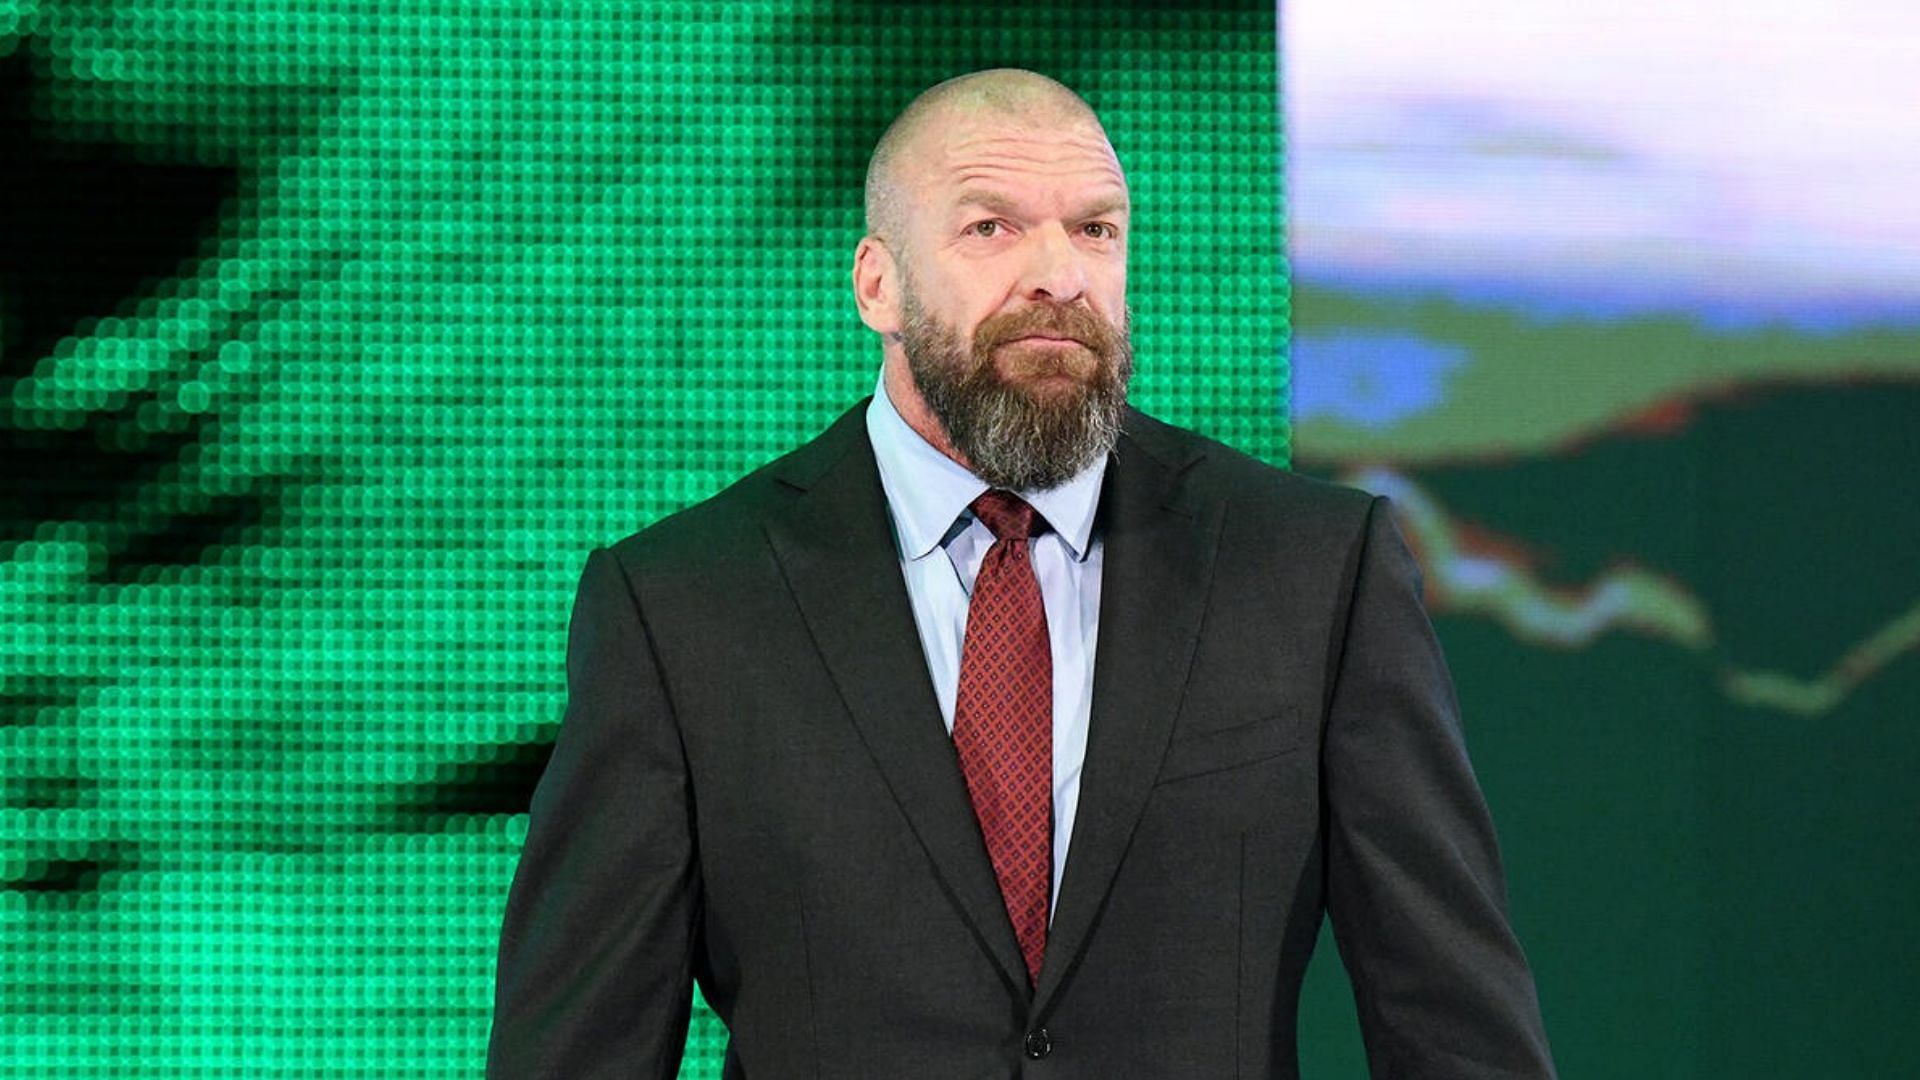 Triple H on Monday Night RAW in 2018!